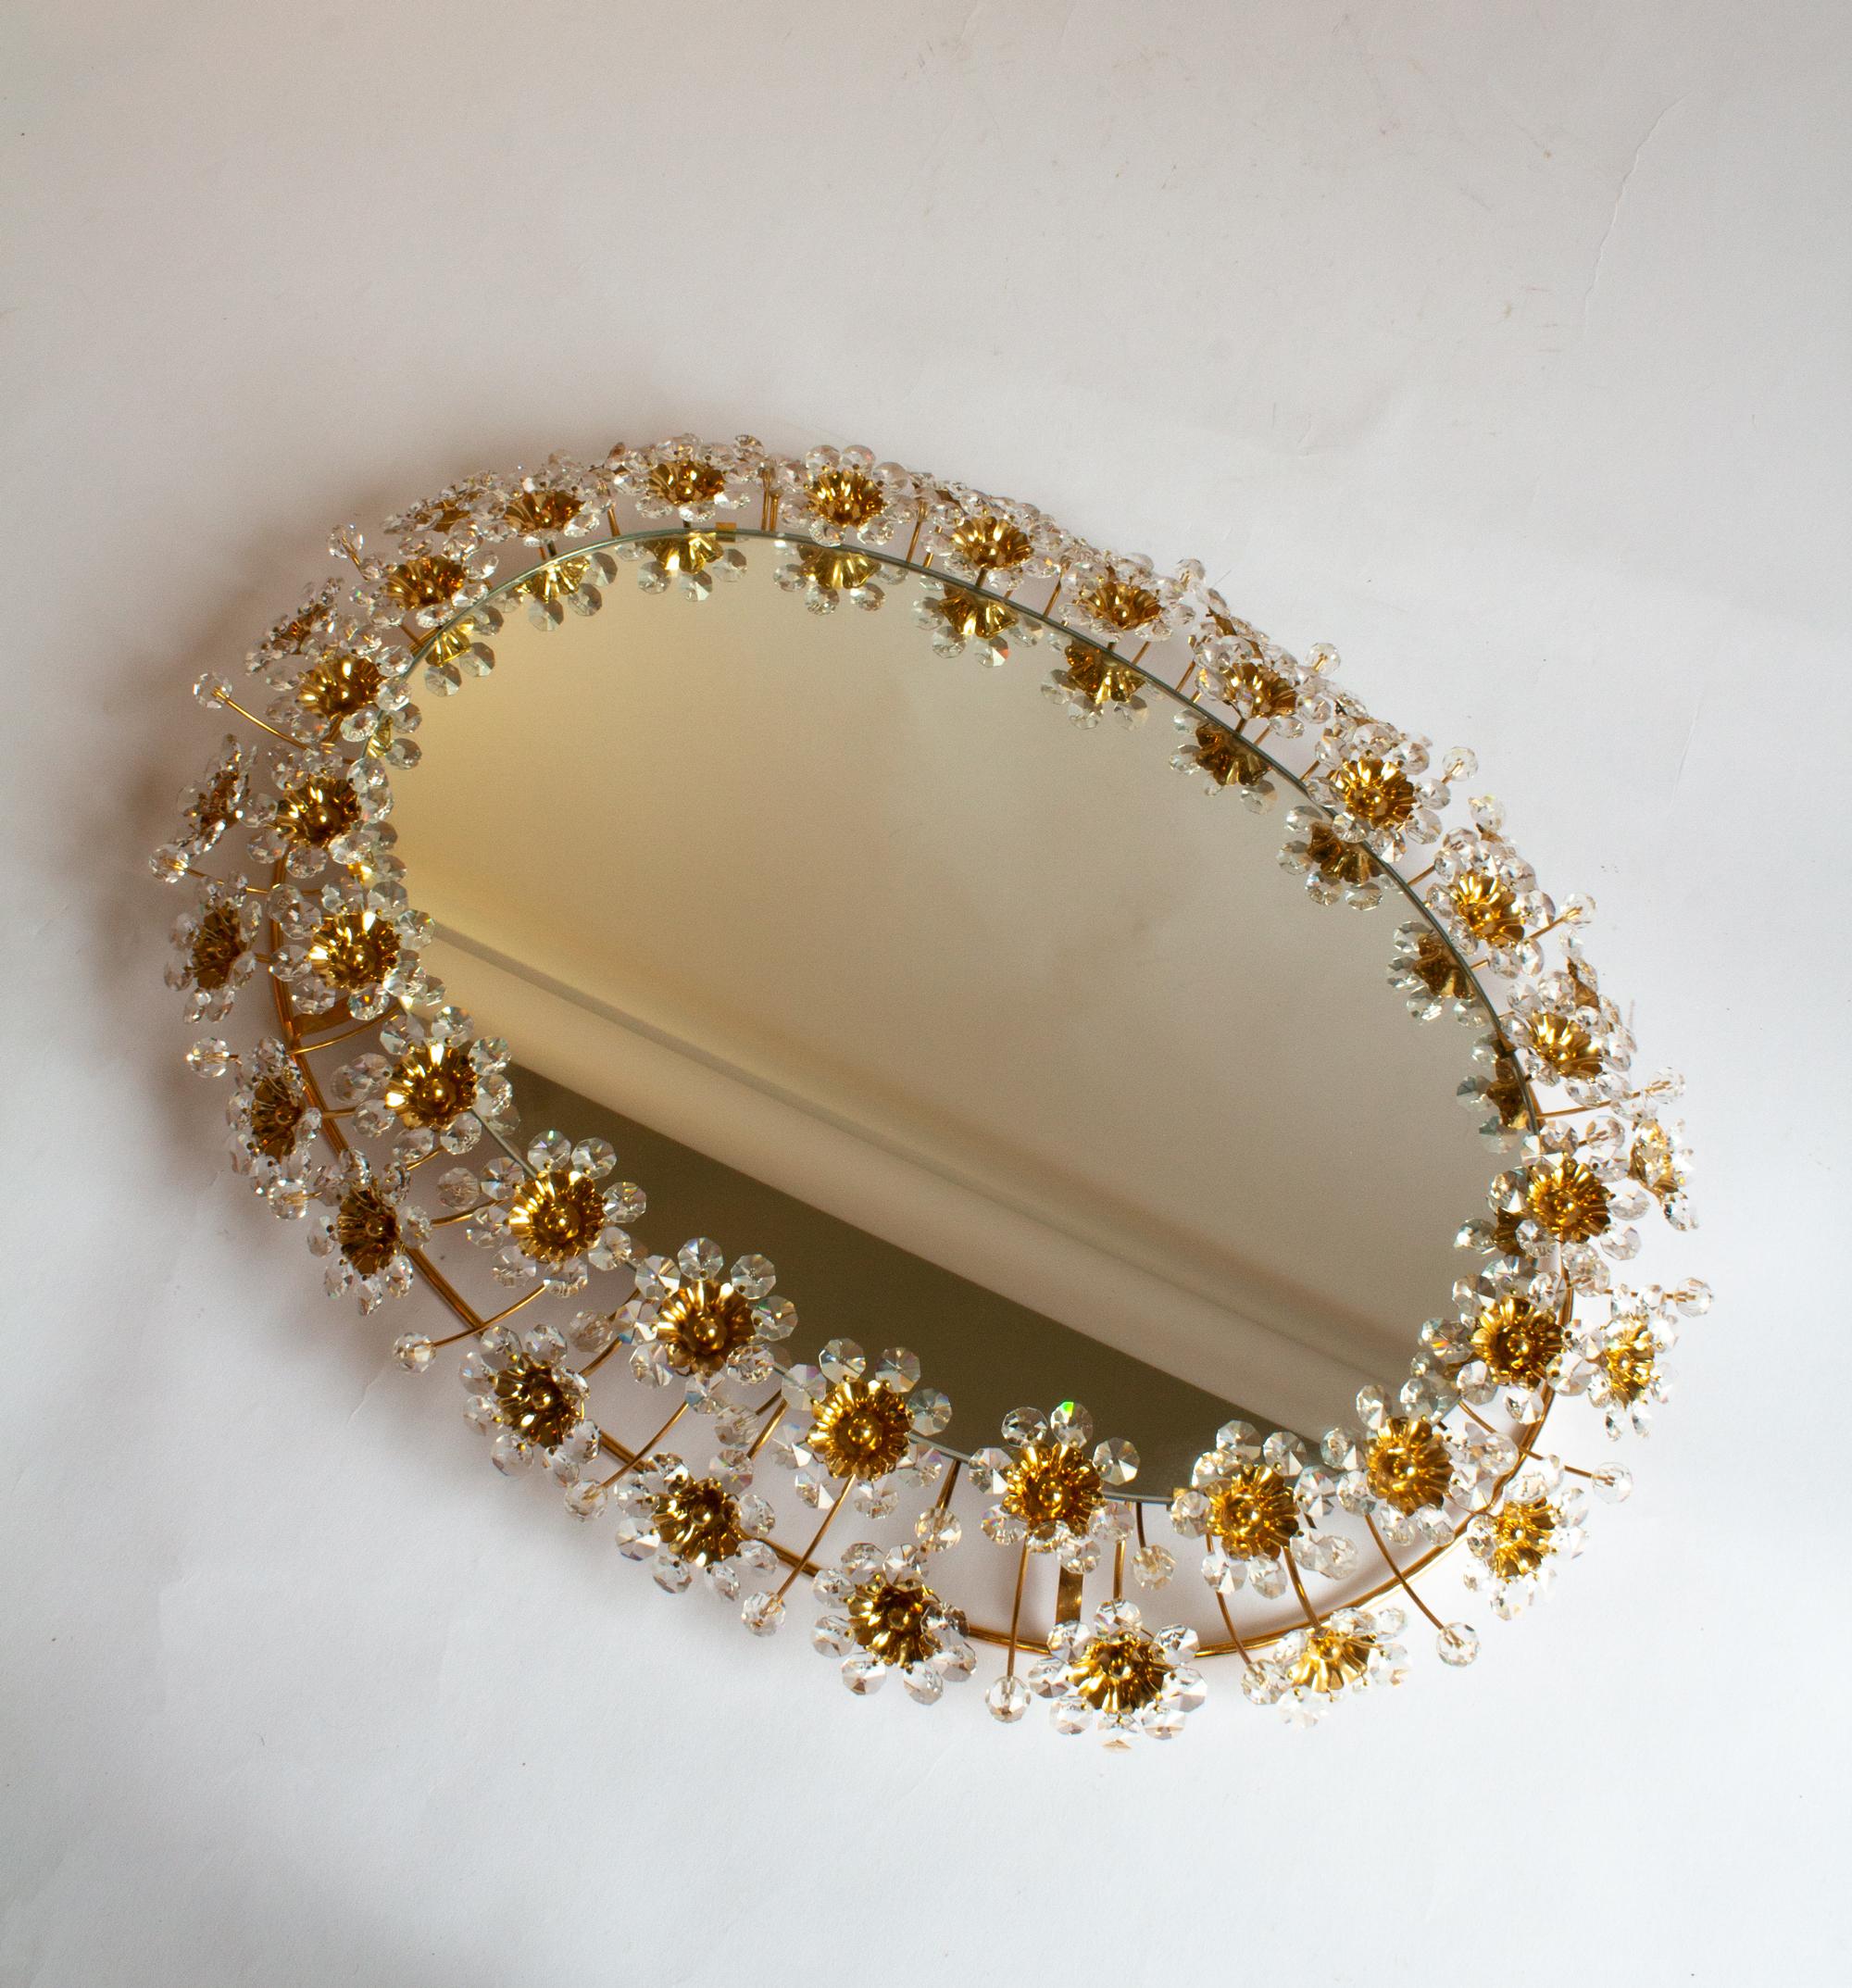 Pair of oval Palwa backlight mirrors with guilt brass and crystal flowers.
These vintage flower mirrors was manufactured by Palwa in Germany. The mirrors is held by an oval guilt brass frame and a border of delicate little flowers made of faceted